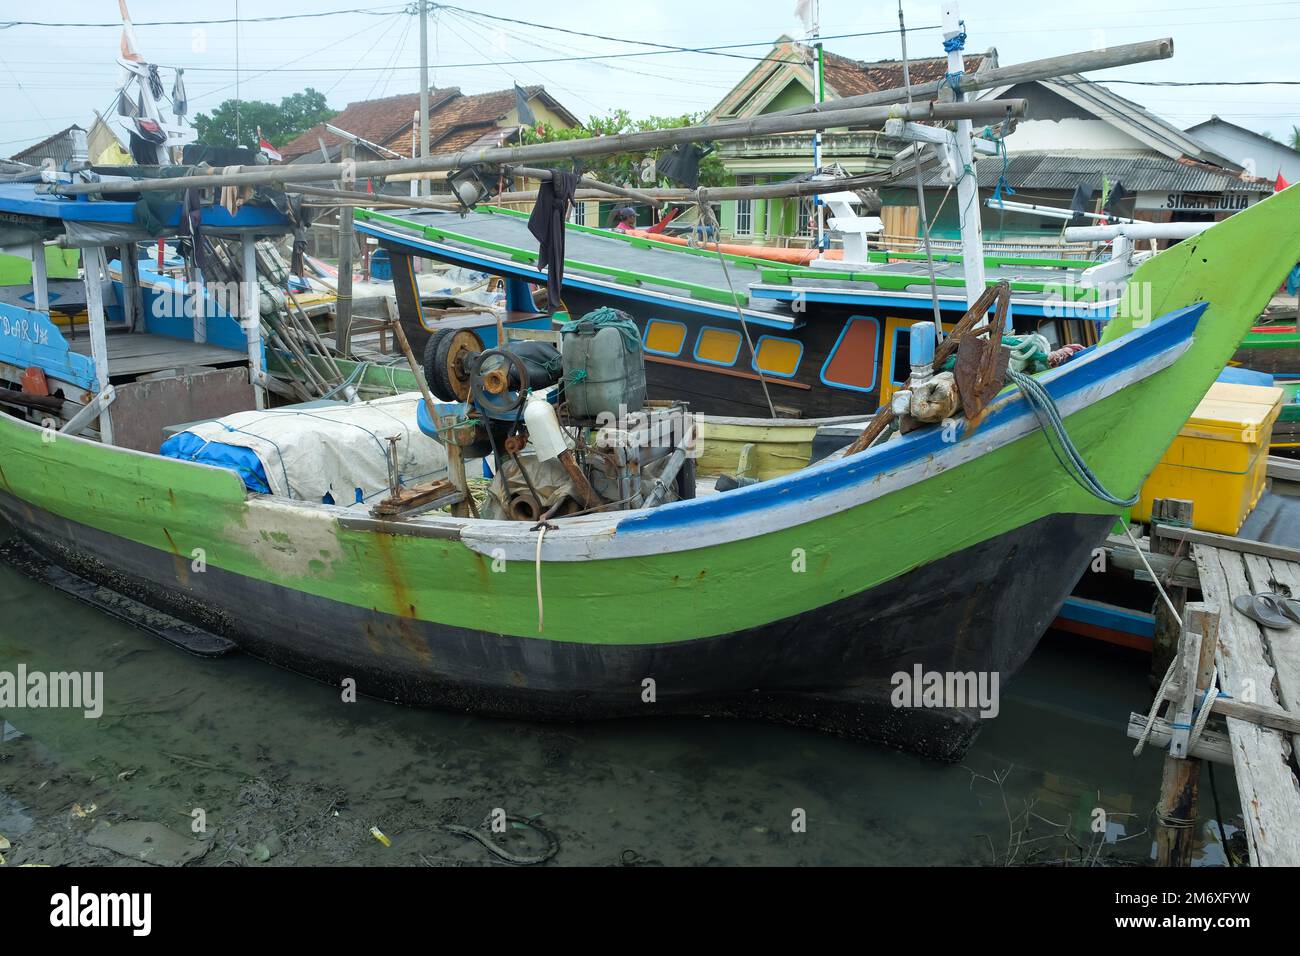 Lampung, Indonesia 9 Nov 2022: A wooden fishing boat ran aground on the pier due to low tide Stock Photo